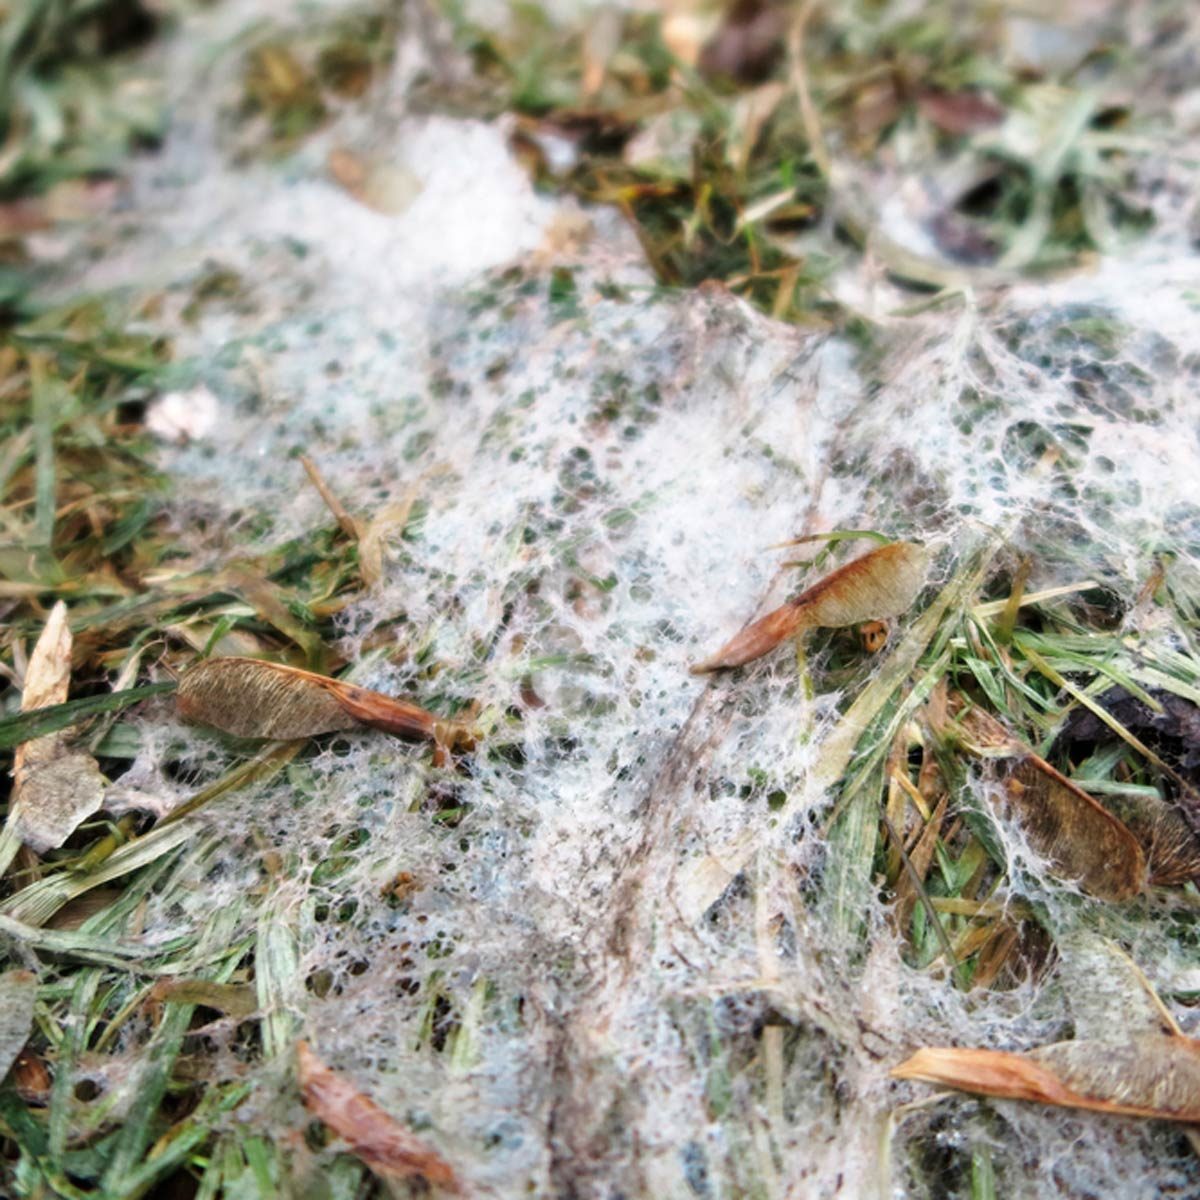 How to Get Rid of Snow Mold Safely